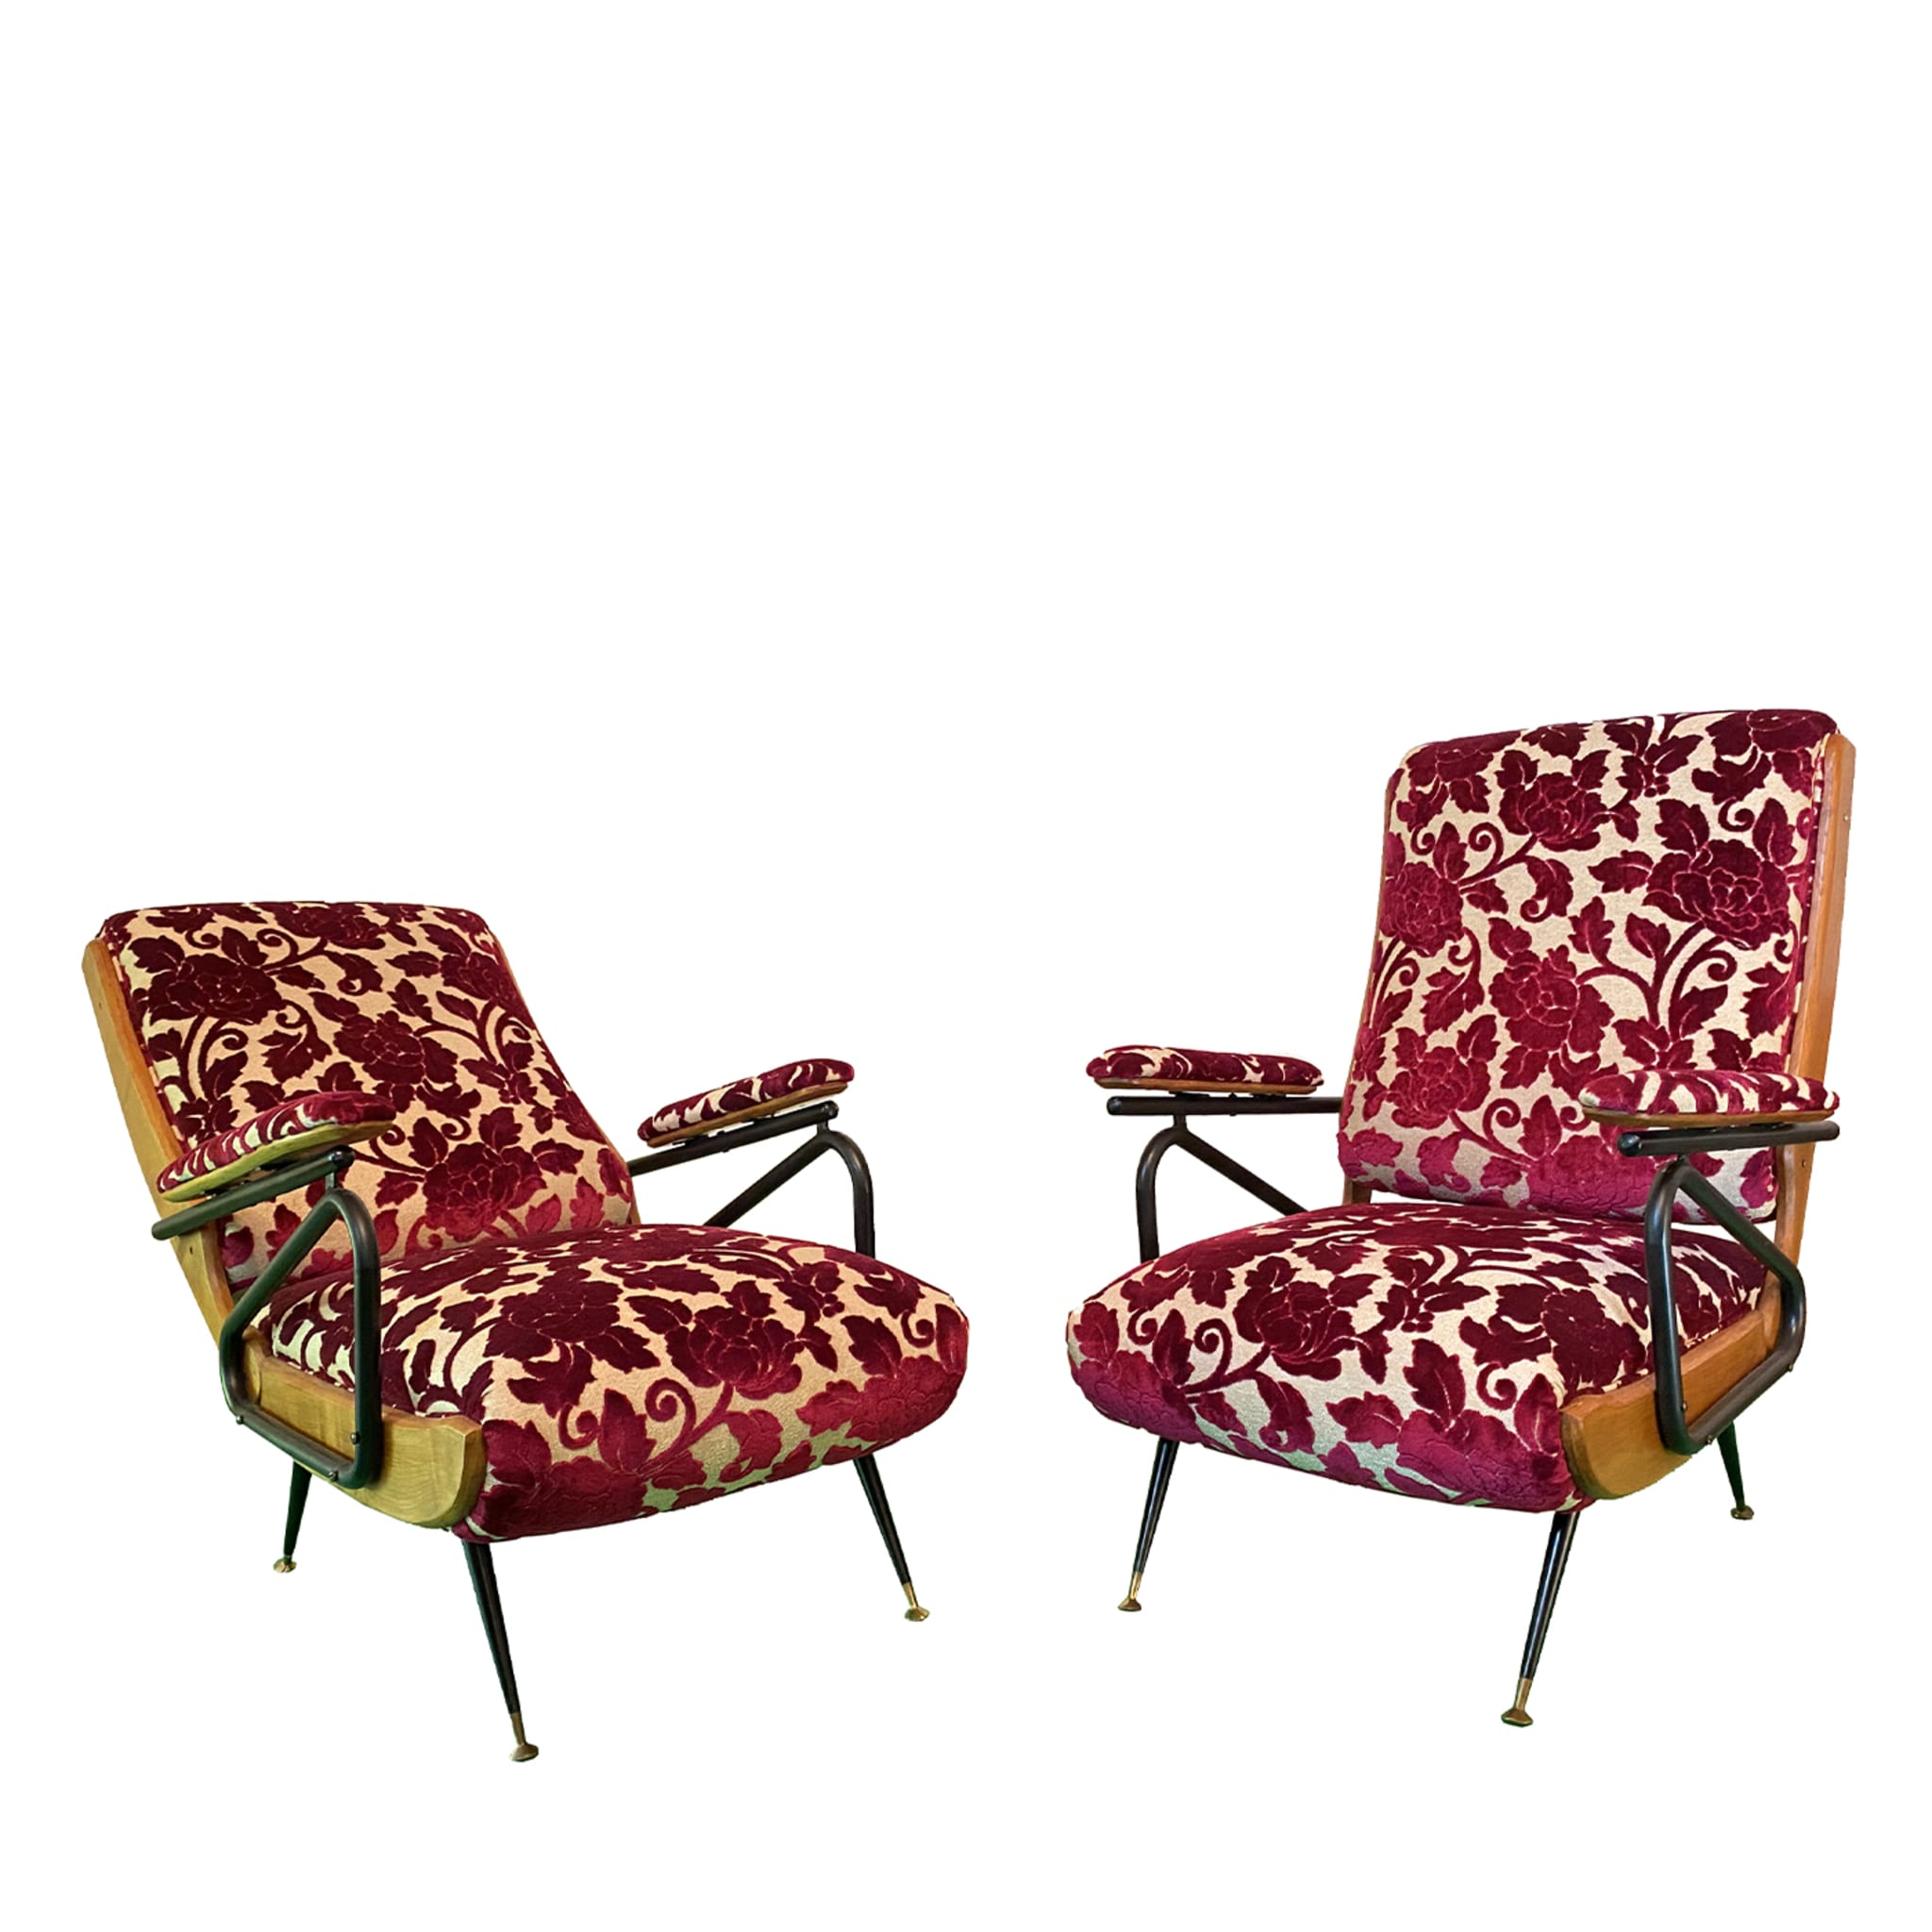 Vintage-Style Set of 2 Brocade Deck Armchairs - Main view